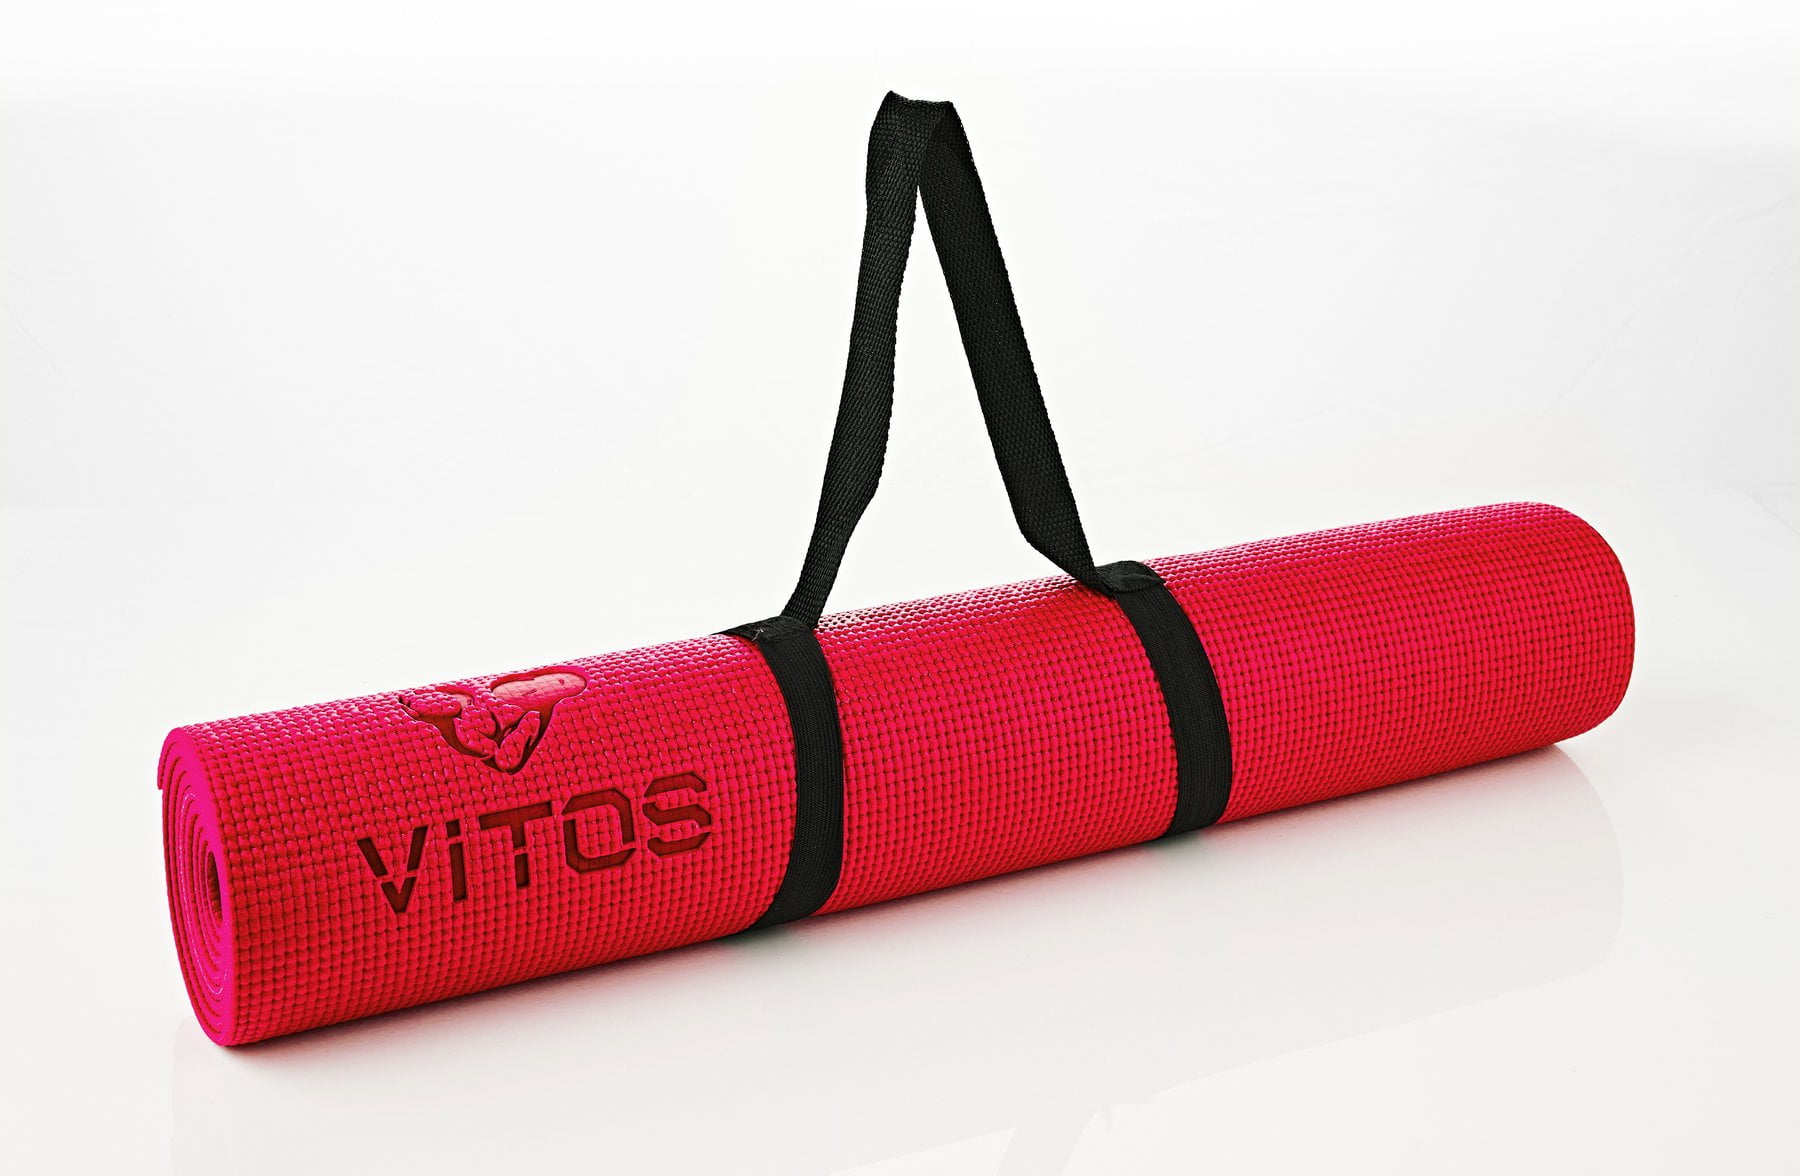 thick padded exercise mat